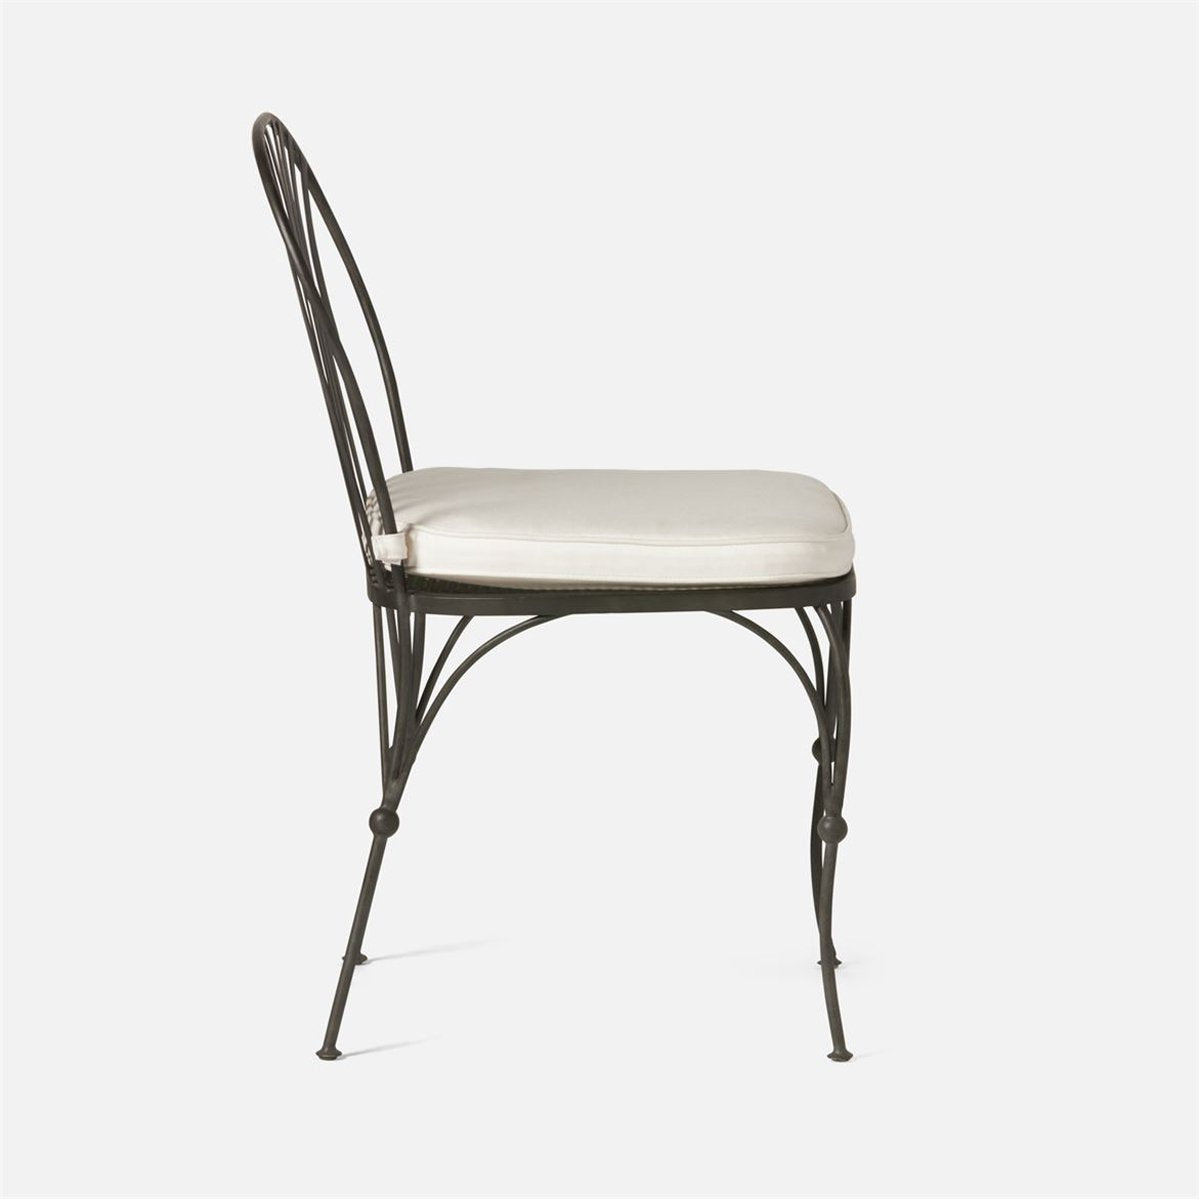 Made Goods Shayne Outdoor Dining Chair with Volta Fabric Cushion